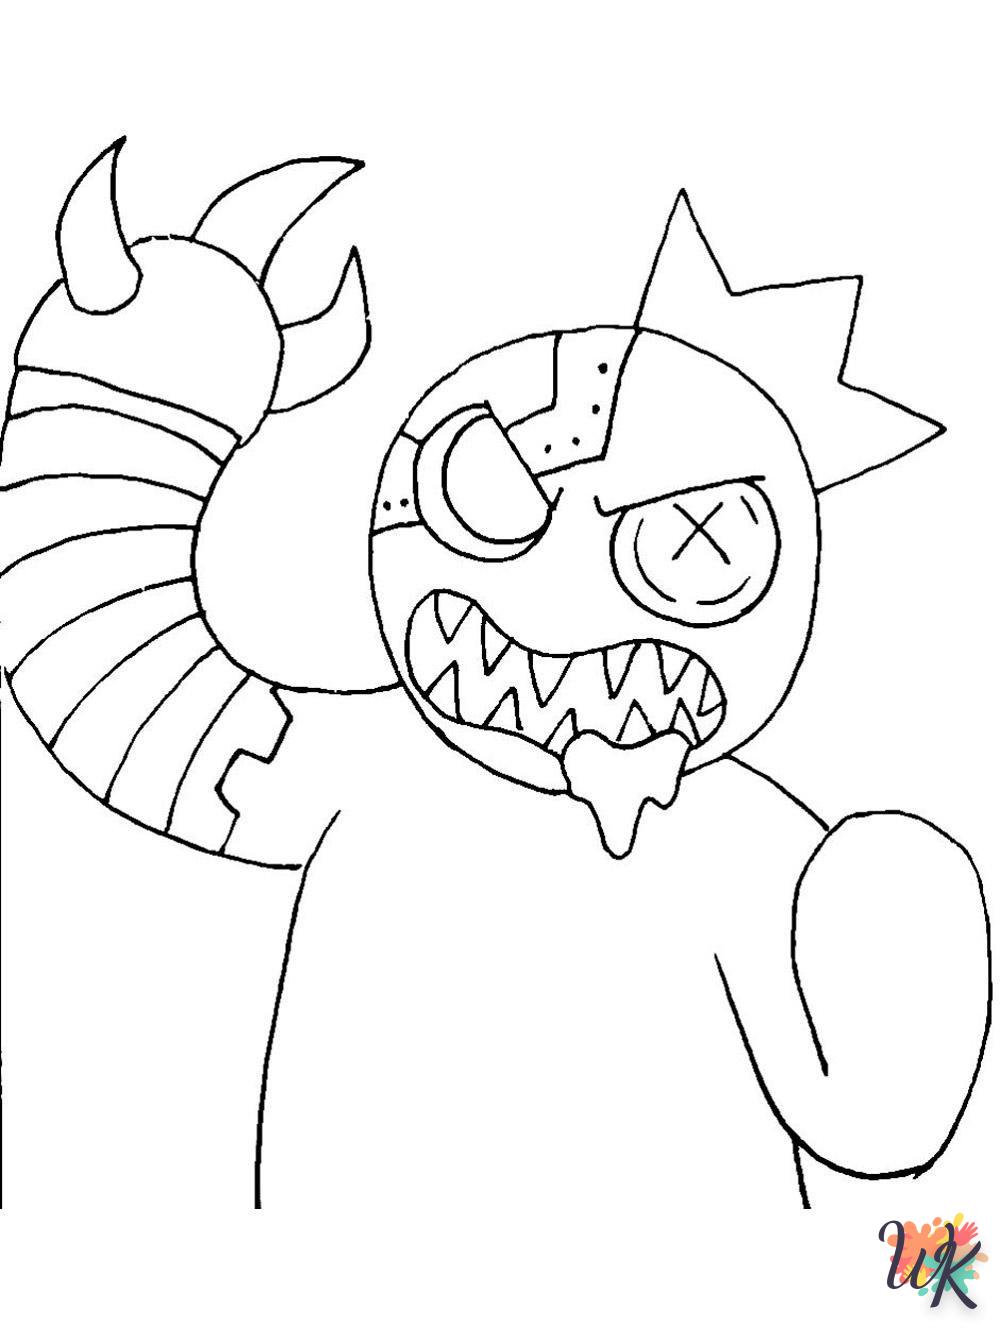 Rainbow Friends coloring pages to print